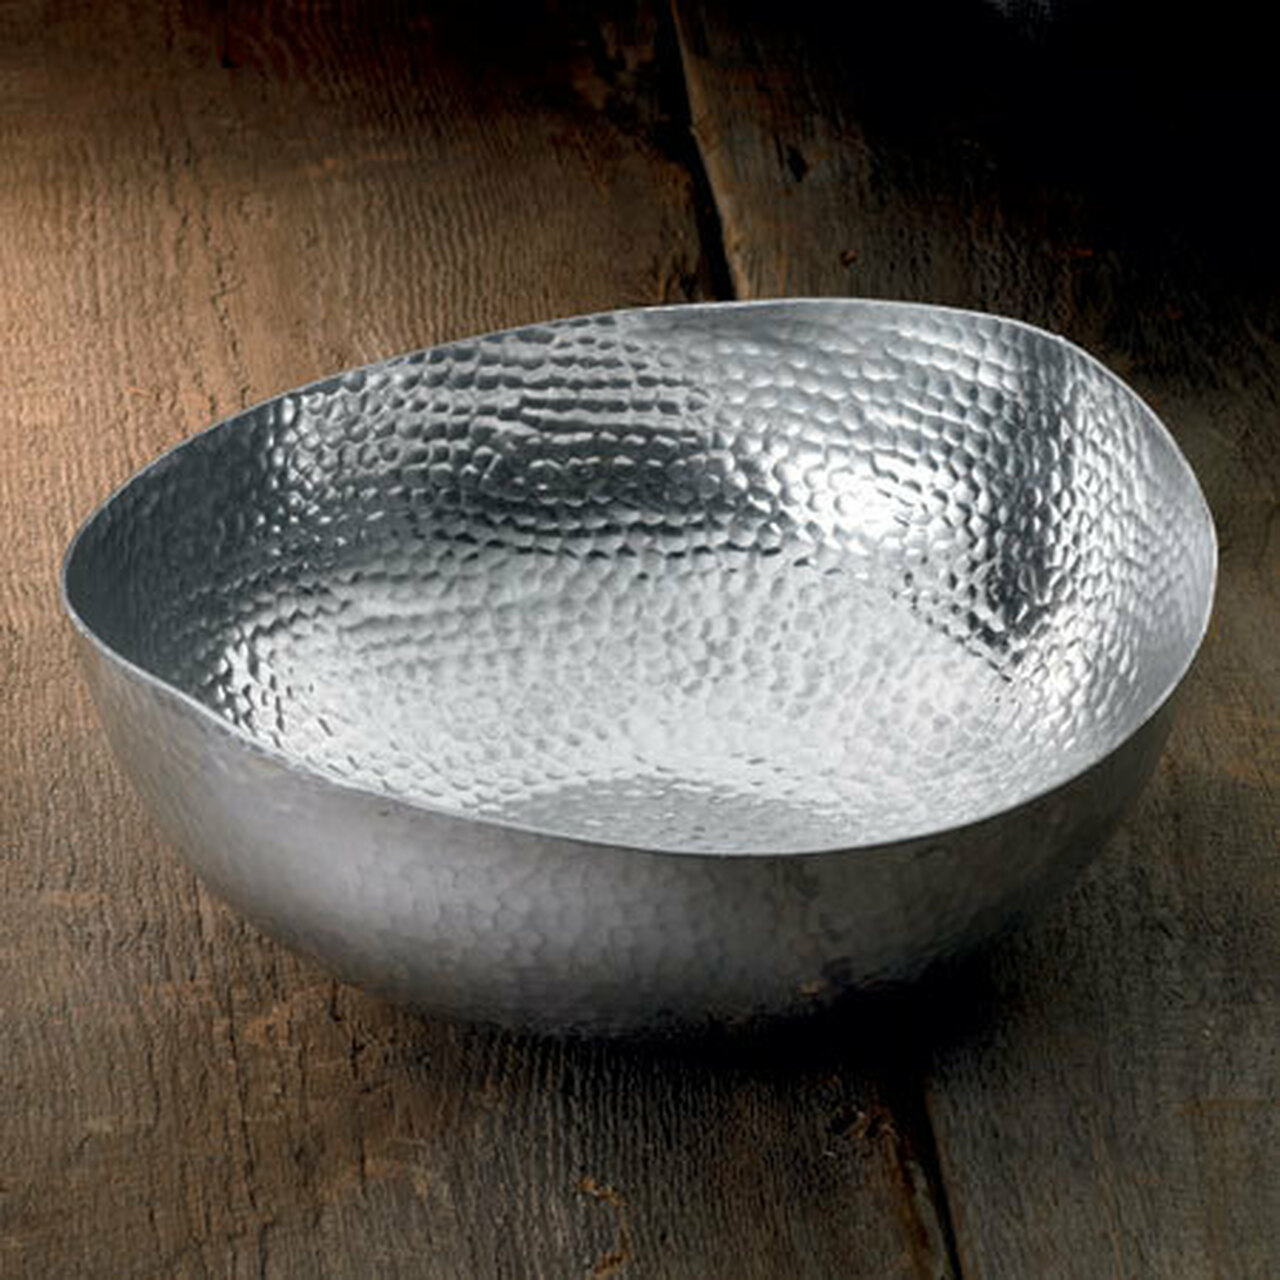 Handcrafted 14.5" Hammered Stainless Steel Centerpiece Bowl